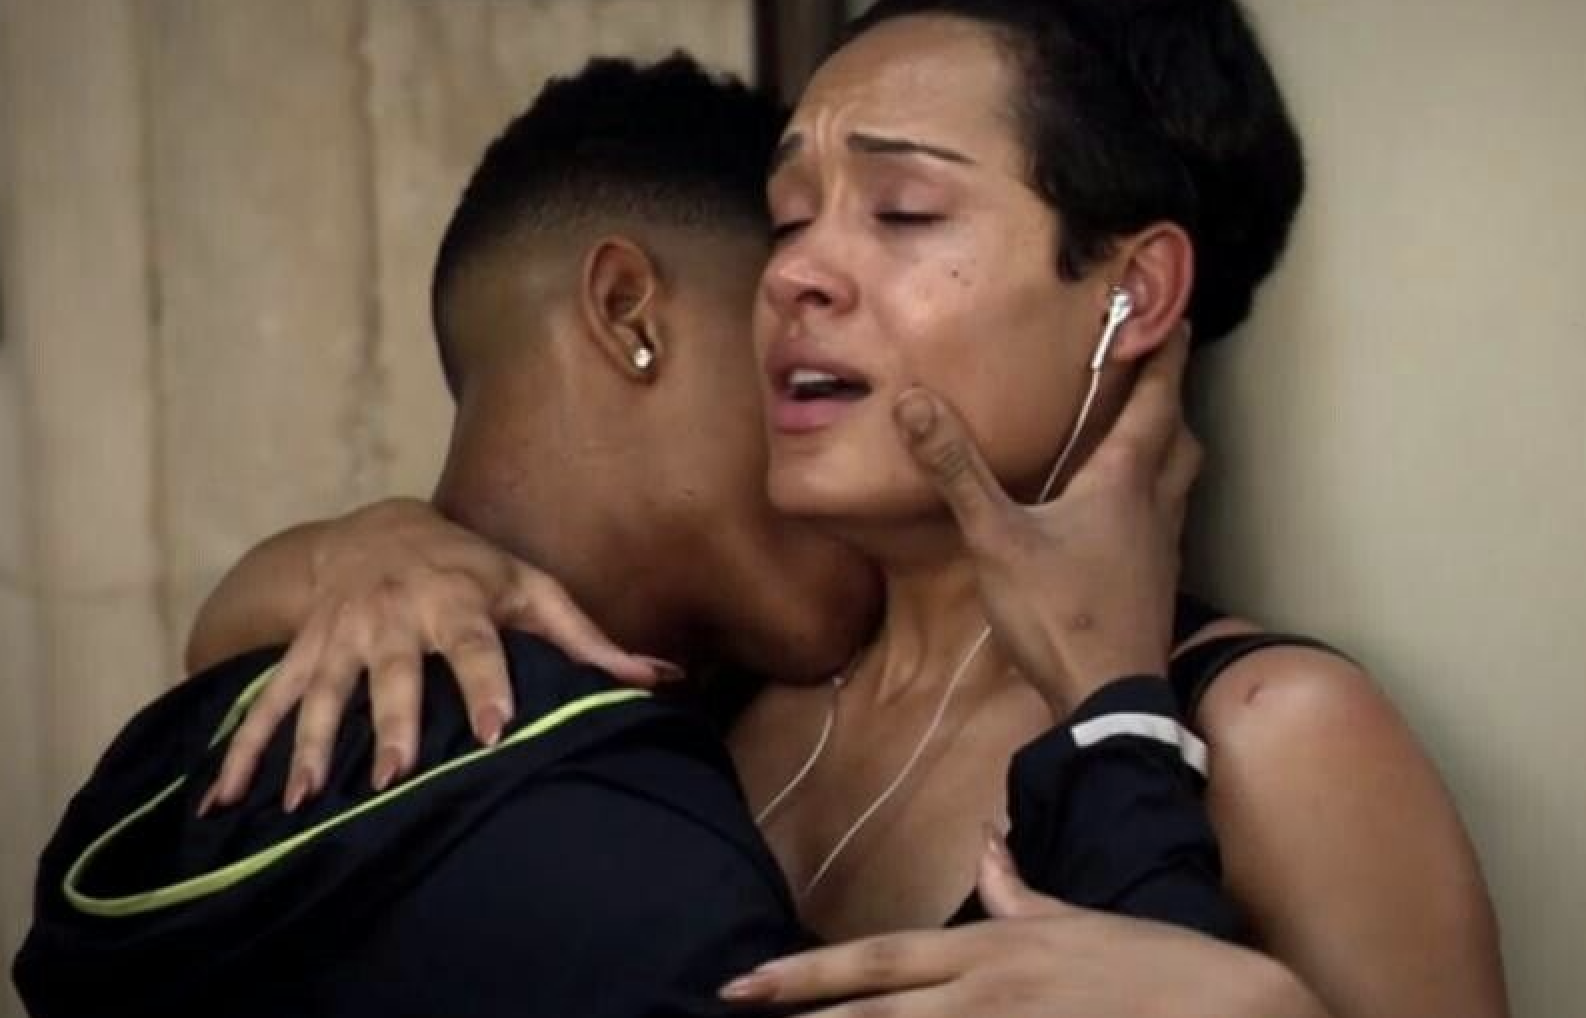 Hakeem kissing Anika&#x27;s neck up against a wall while she makes a sexual face.